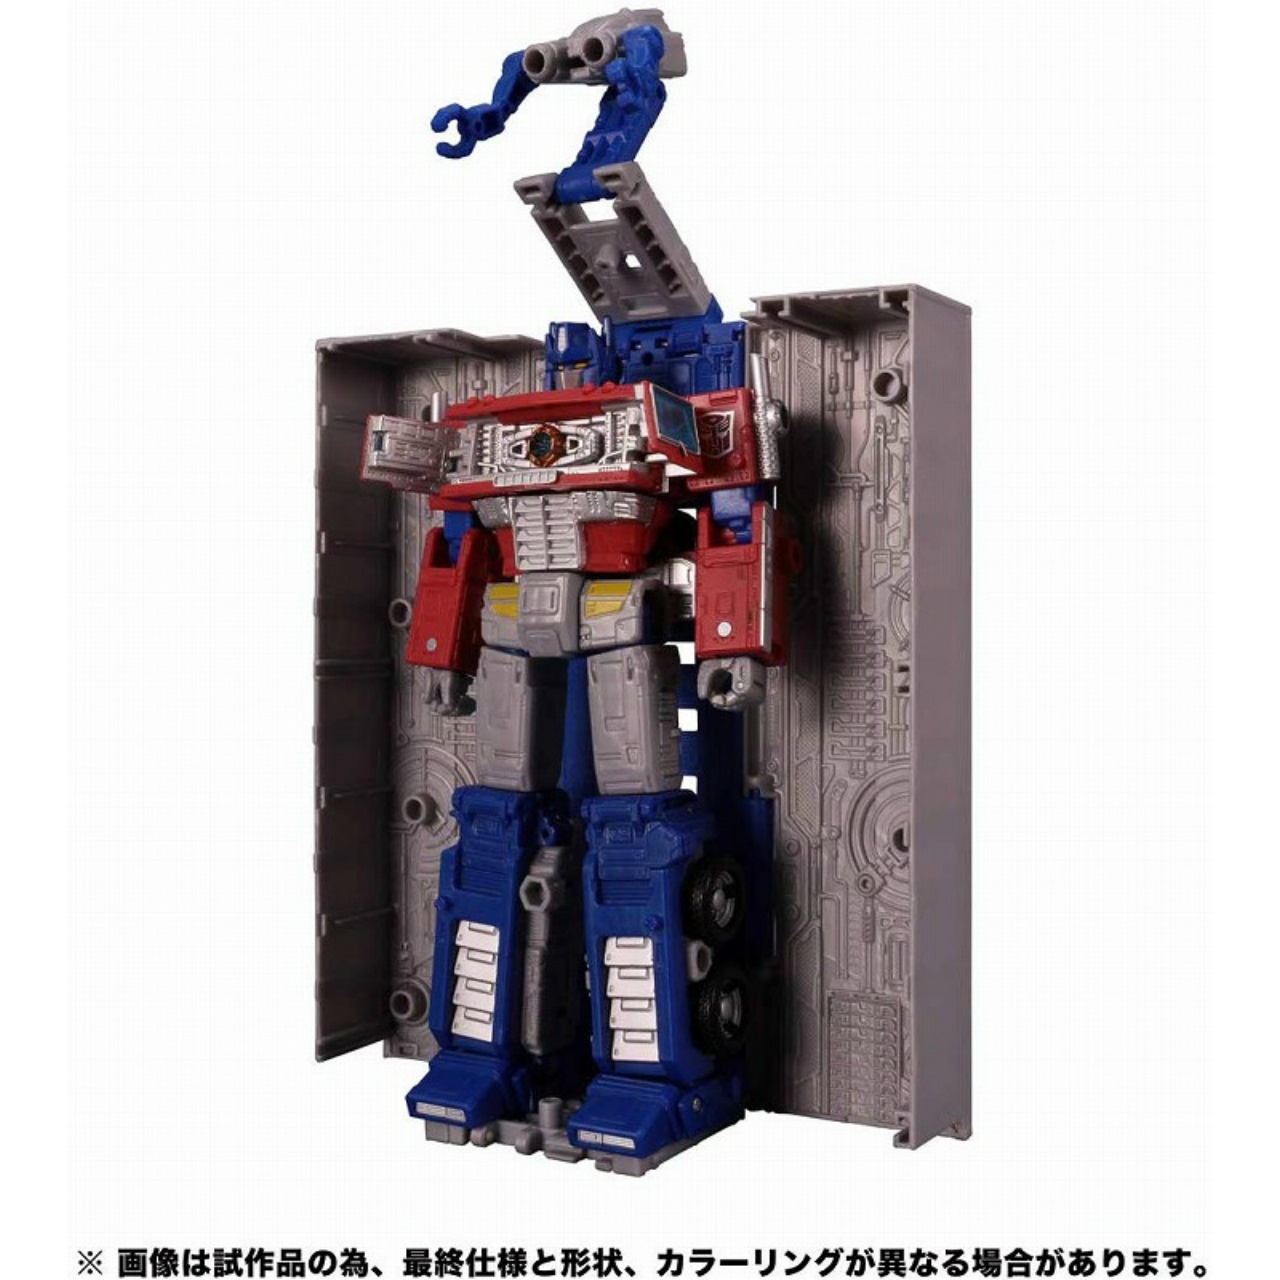 Transformers Earthrise ER-02 Optimus Prime with Trailer